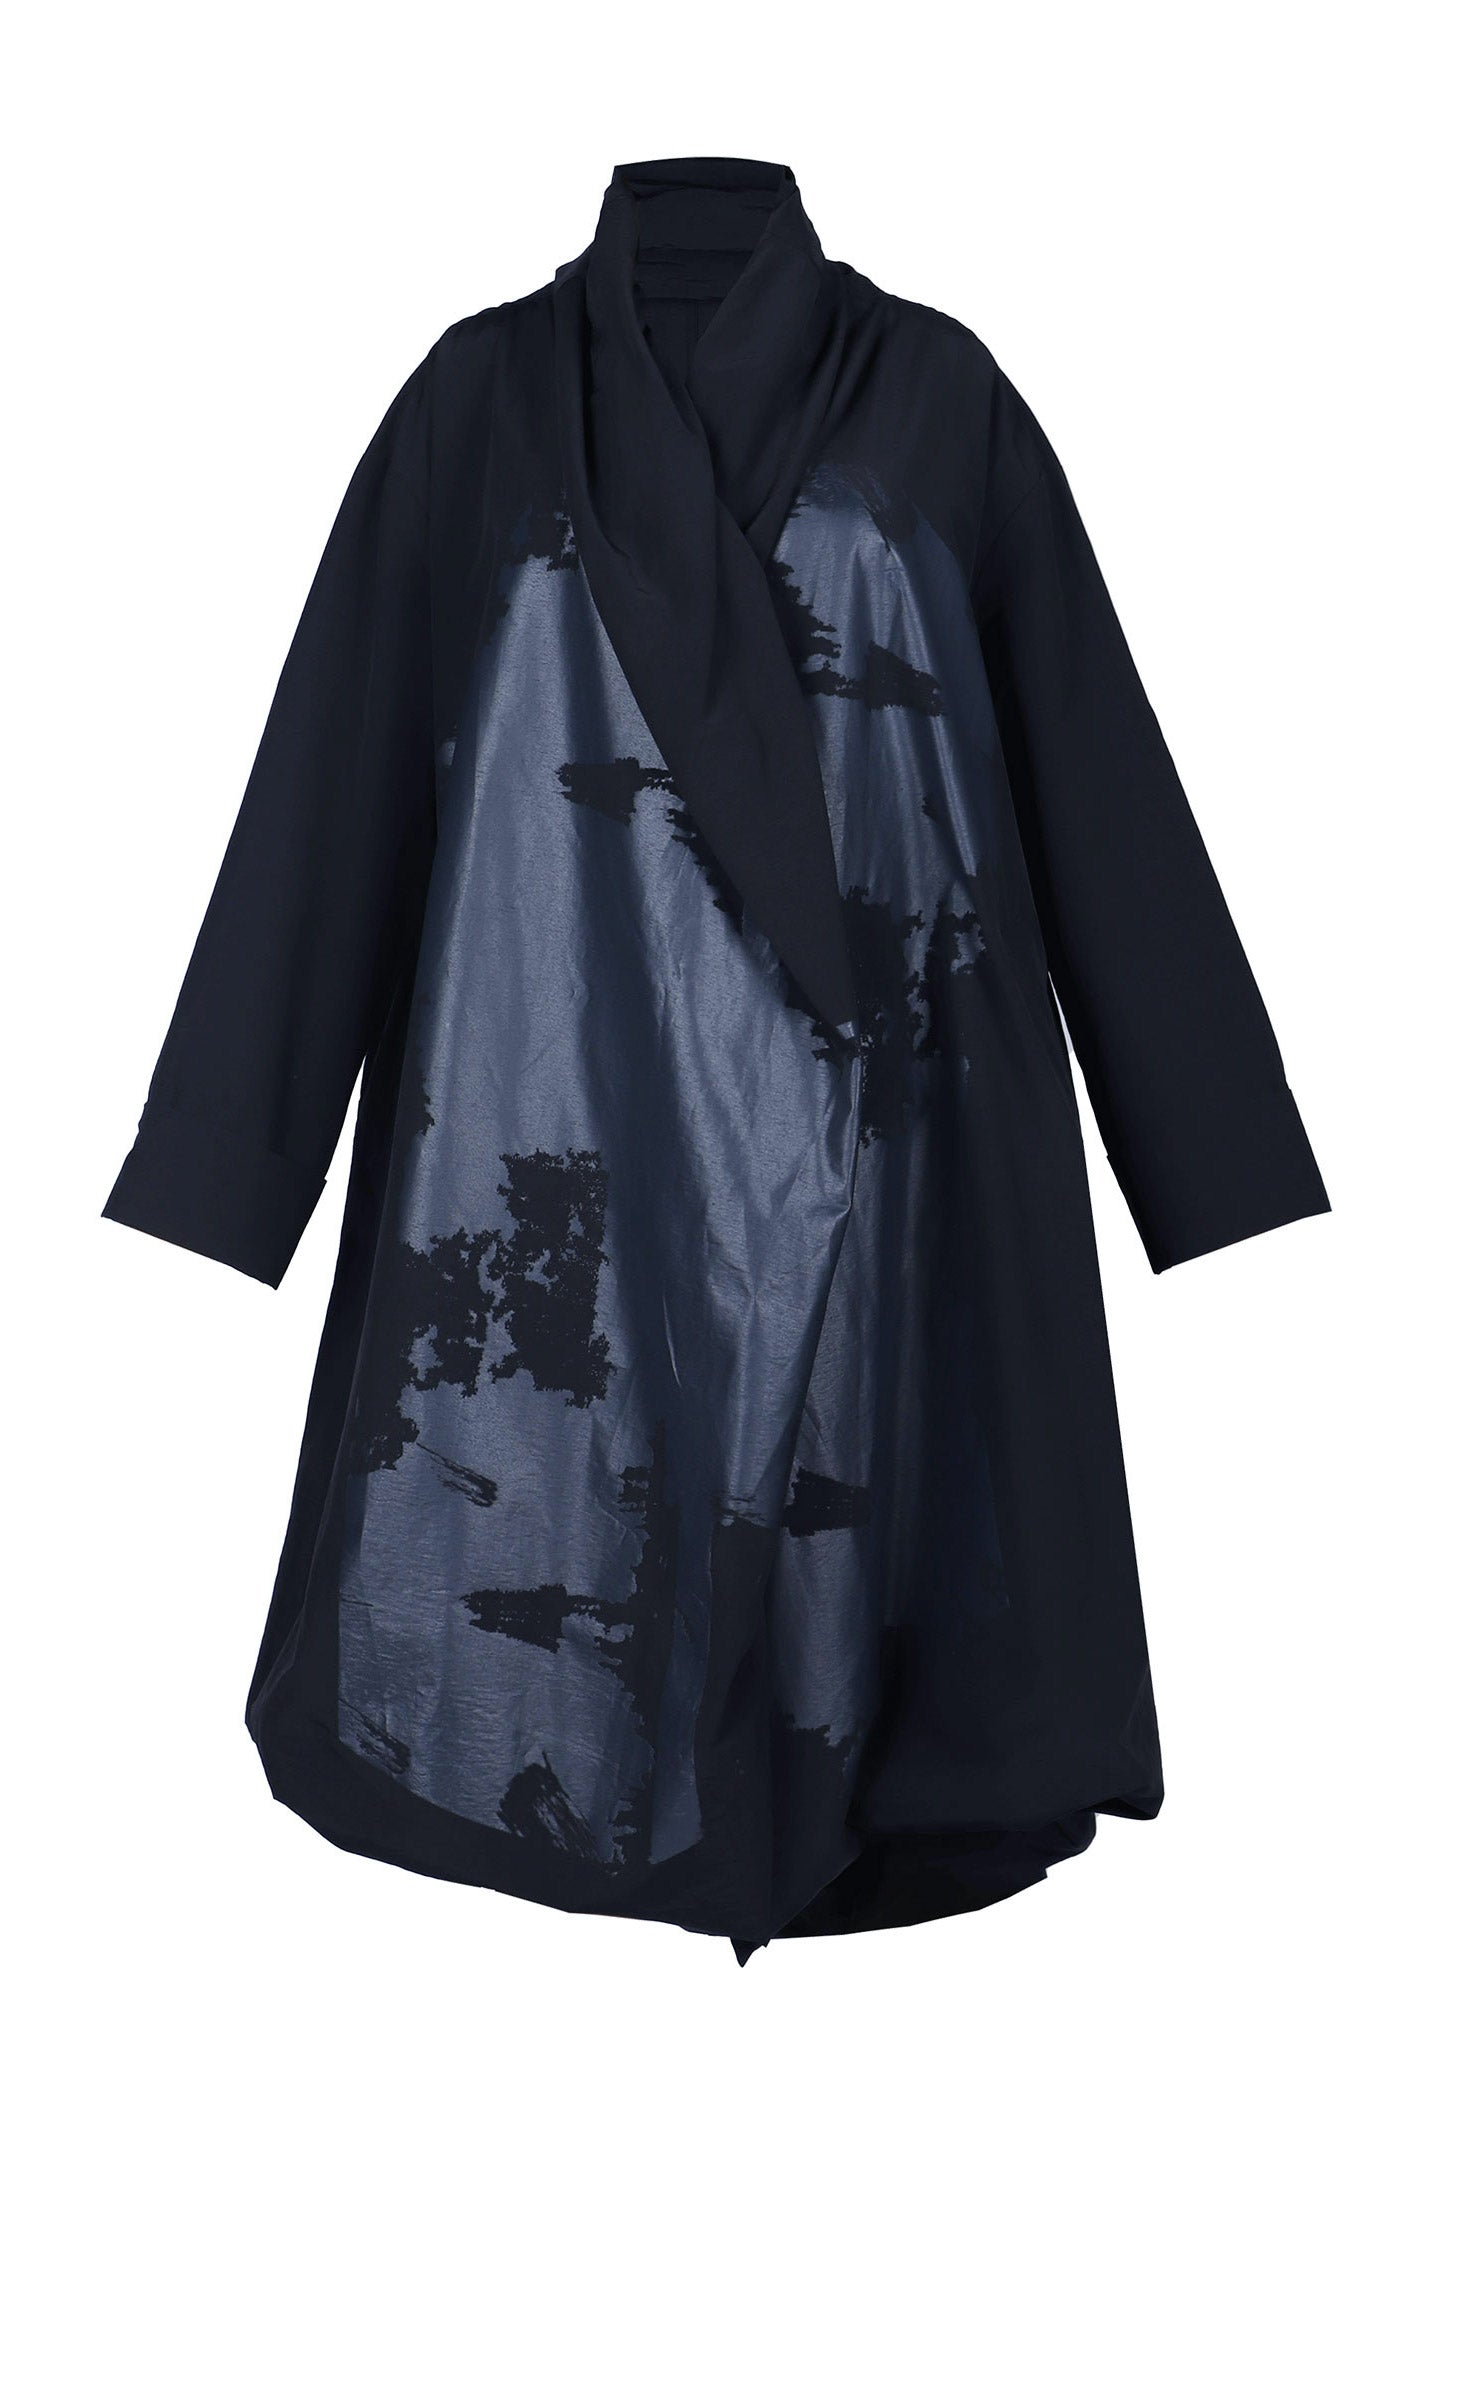 Front view of the luukaa draped open black coat. This coat is black with a black contrast, glossy abstract print on the front. The coat has long sleeves, a billowy fit, and a draped open front with a hem that sits at the knees.